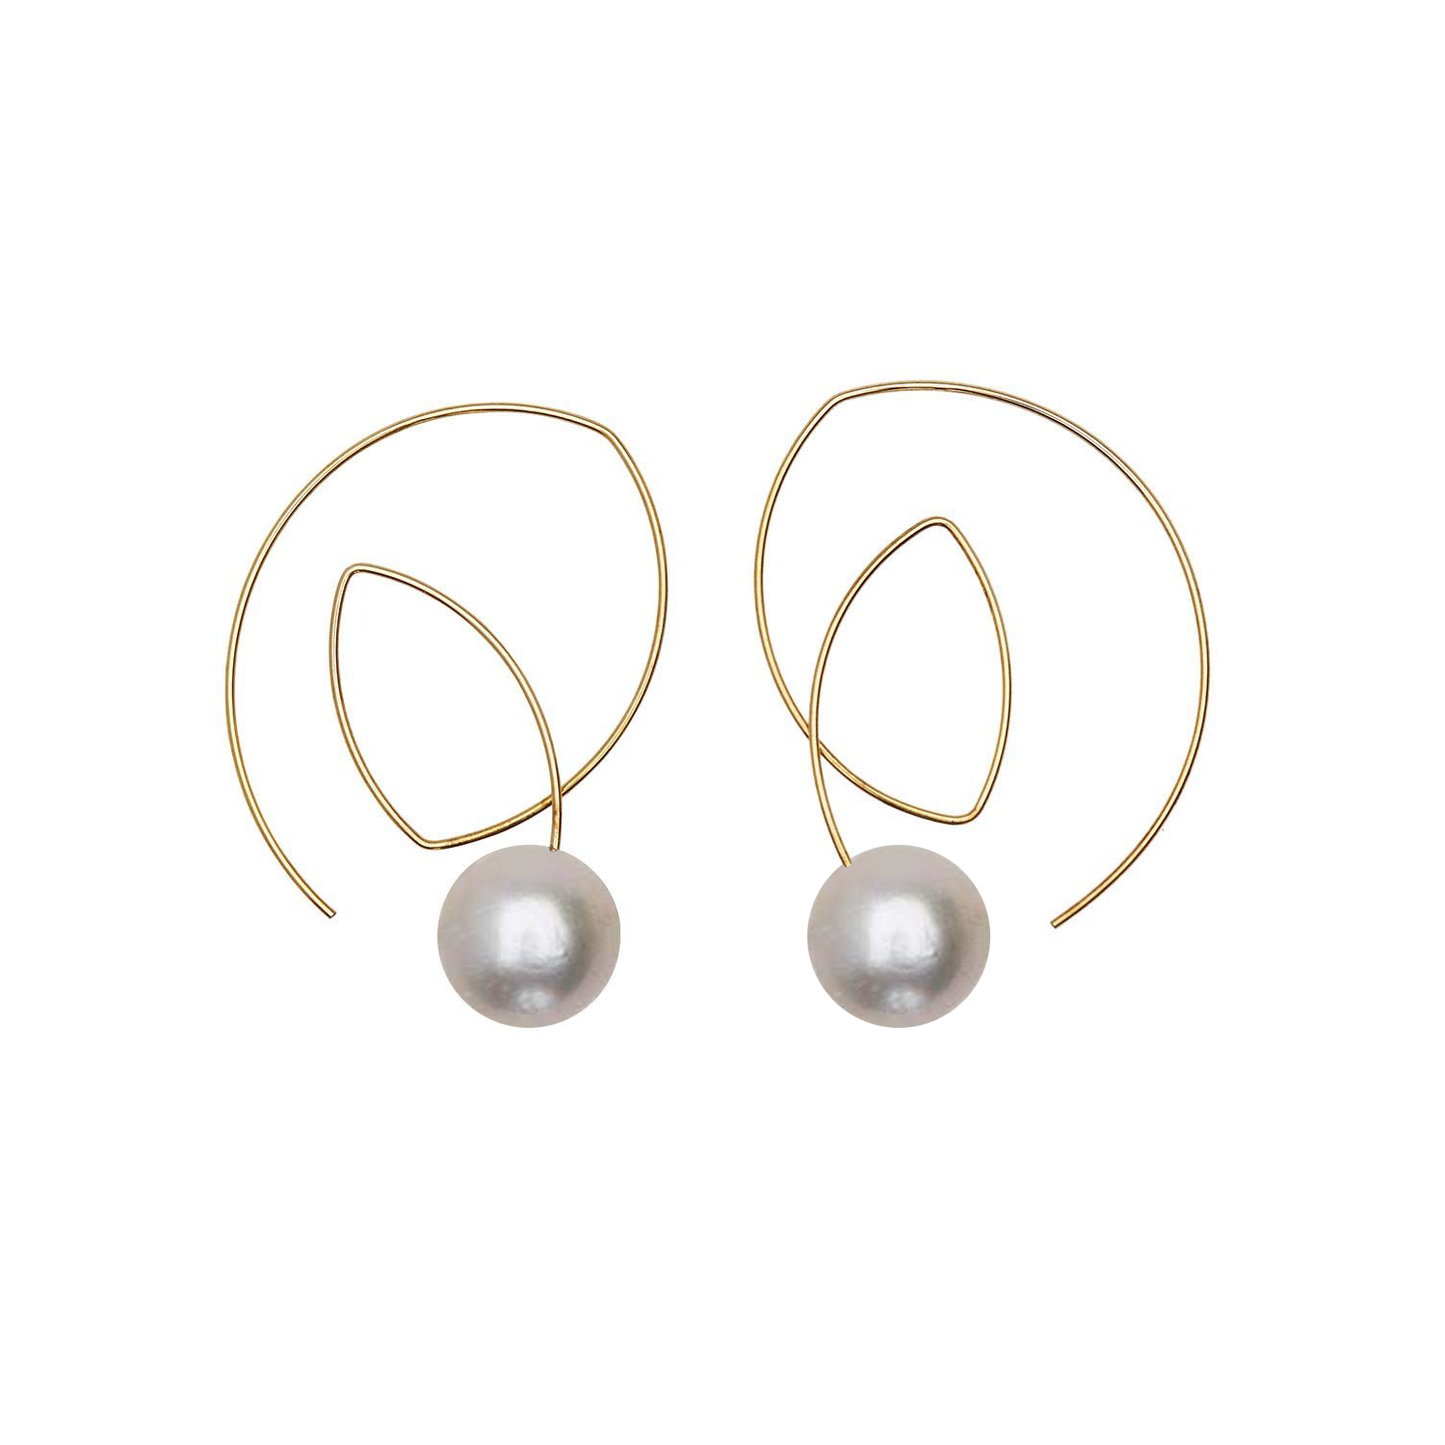 Angled Loop Earrings with Round Freshwater Pearls